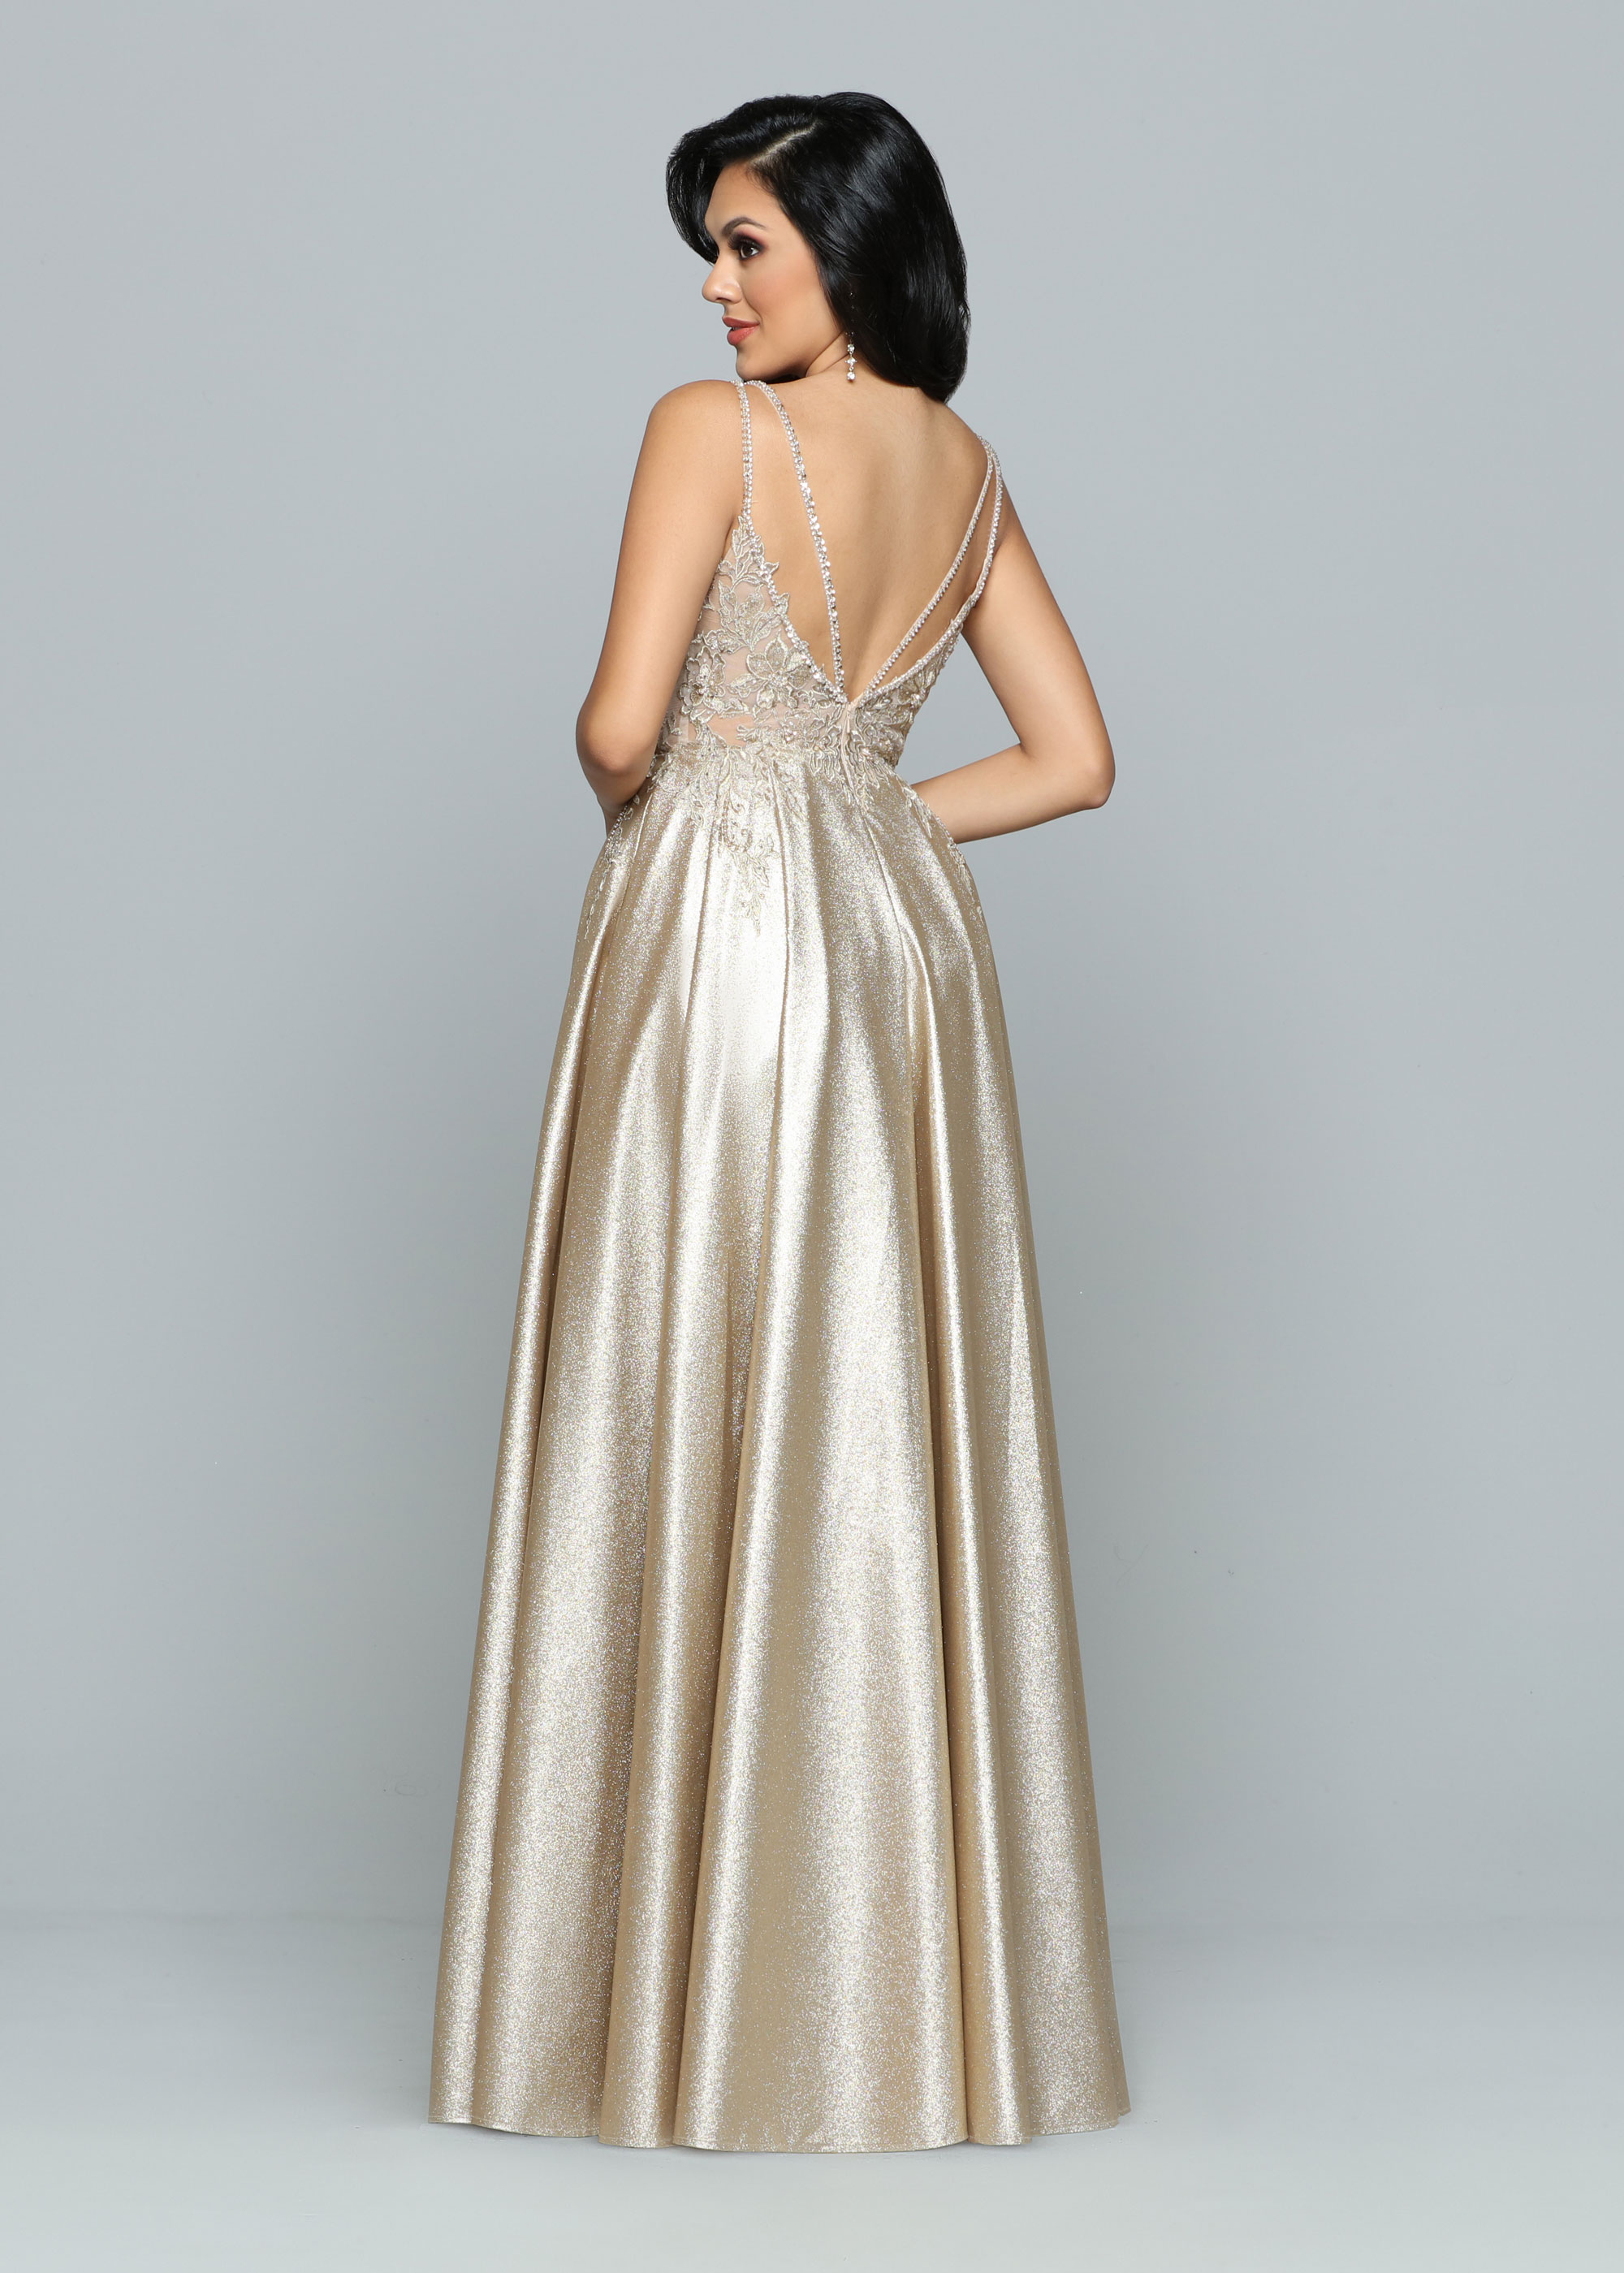 Image showing back view of style #72205